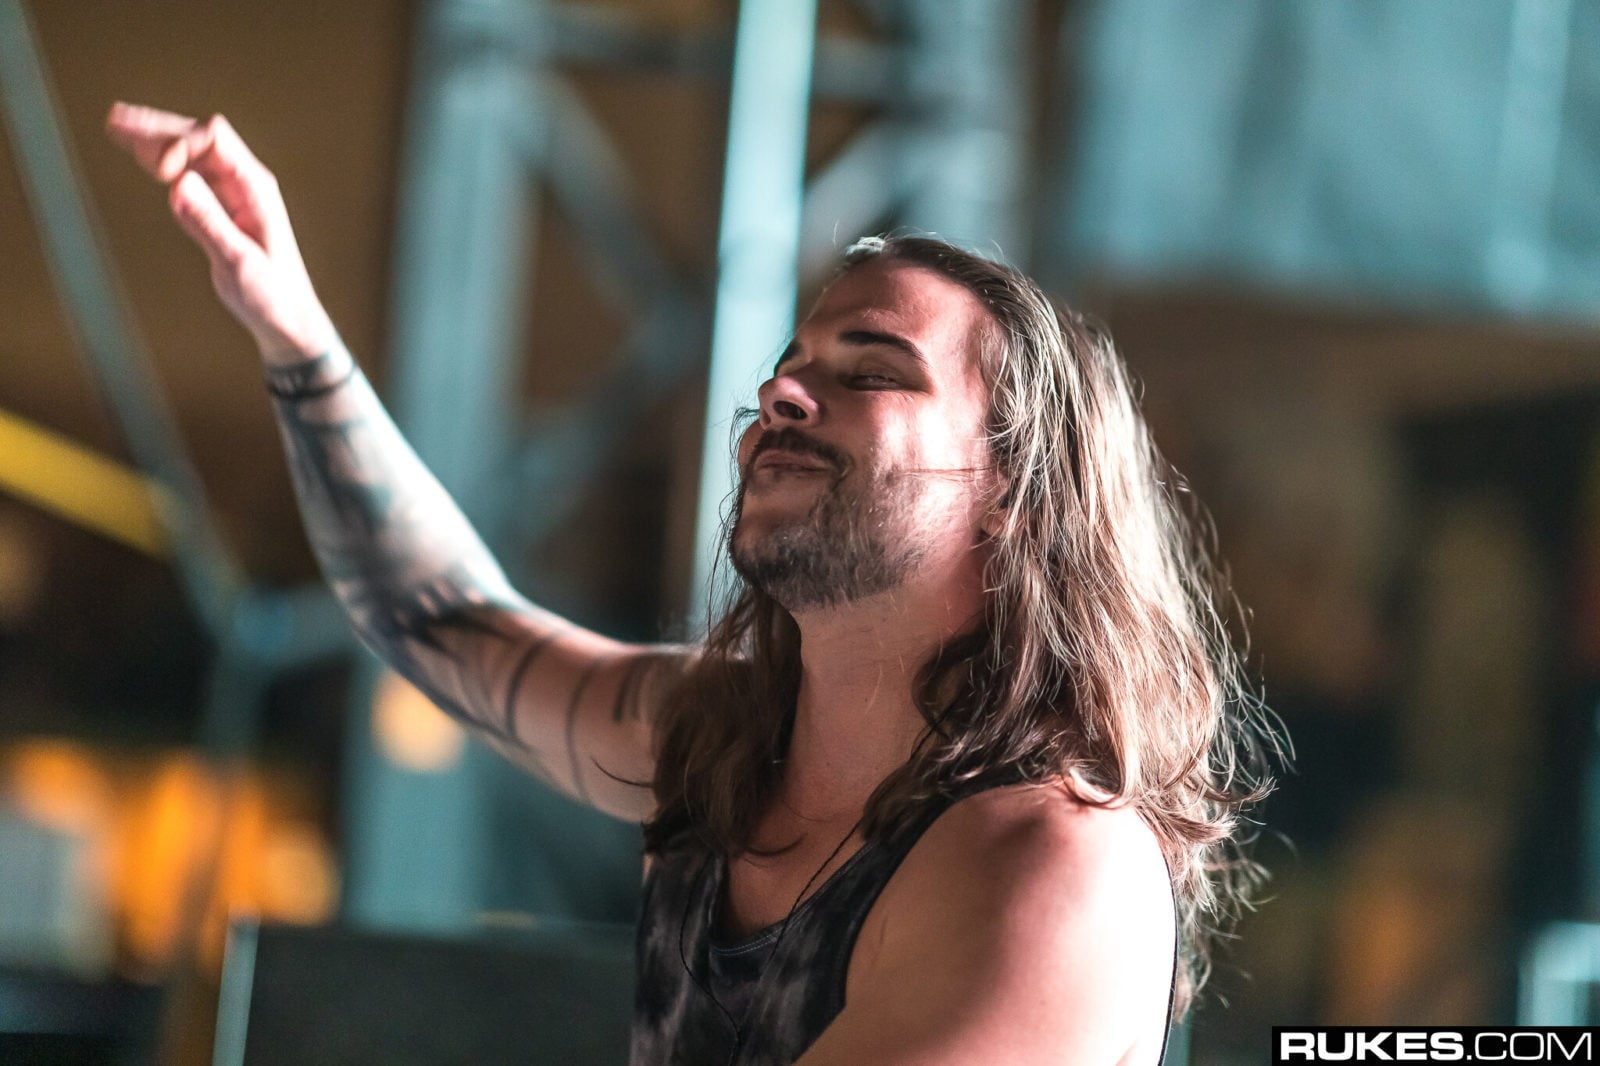 Seven Lions Drops First Single Solo 'Only Now' feat. Tyler Graves This Year